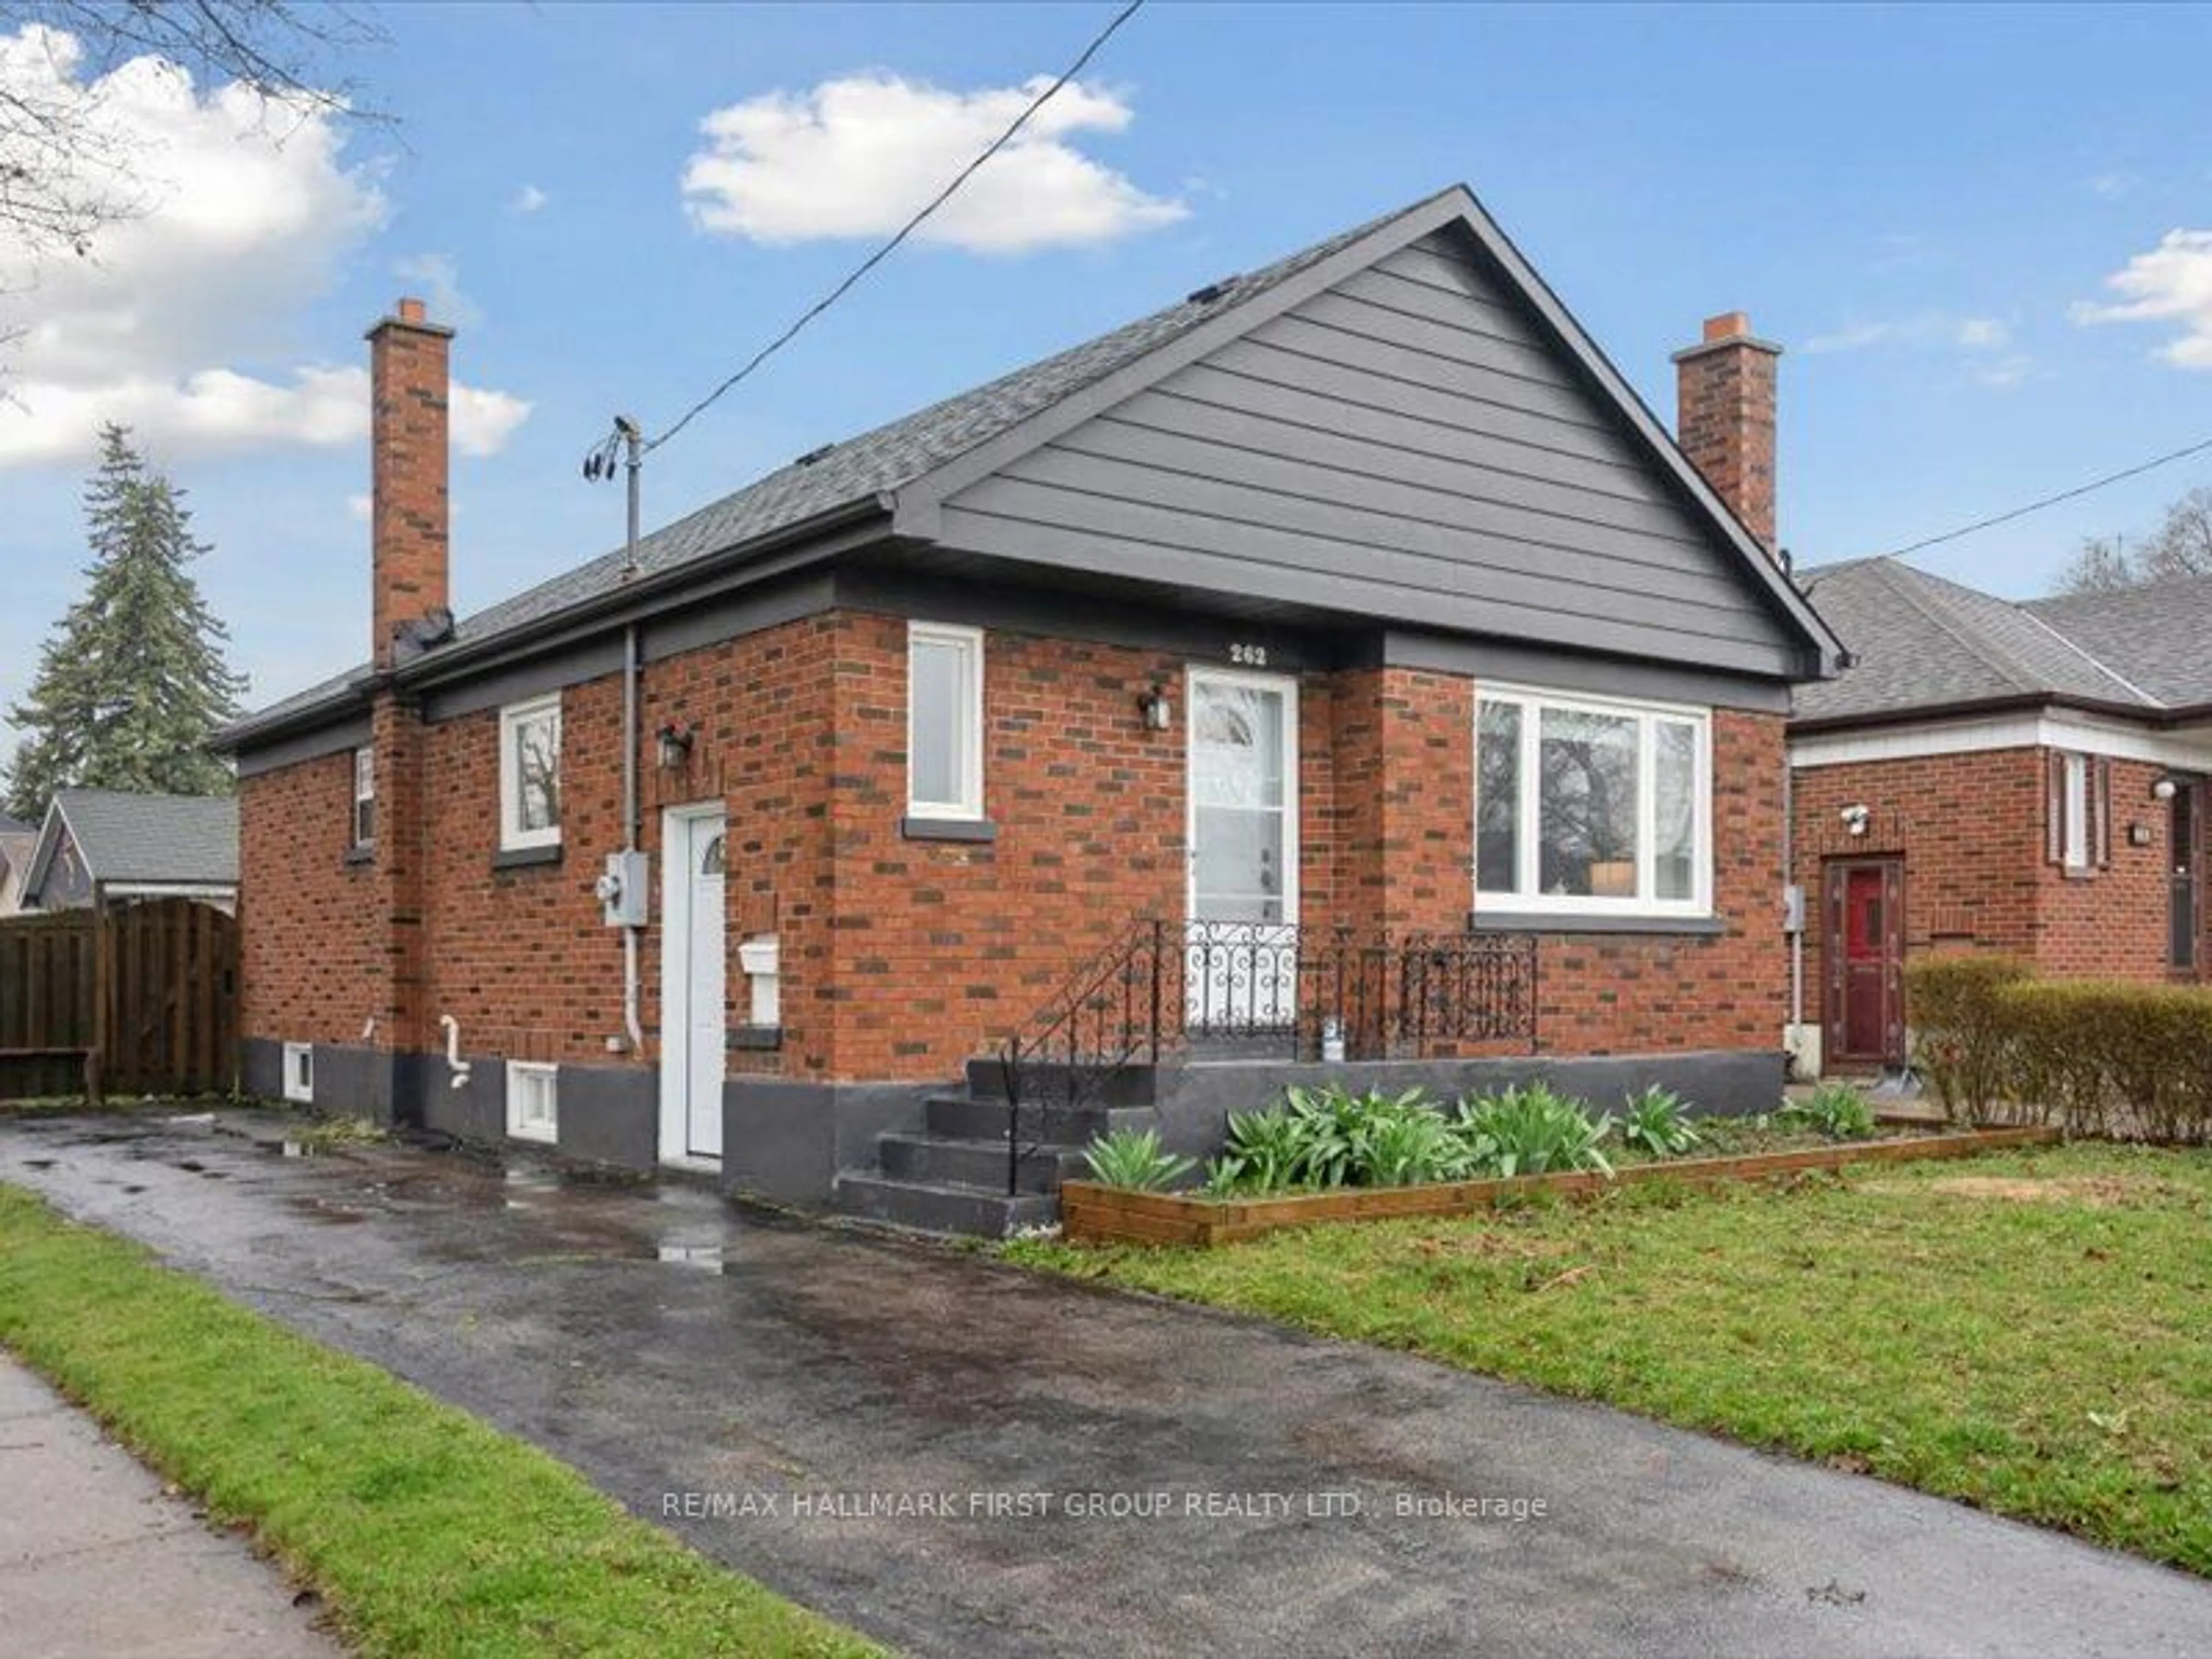 Home with brick exterior material for 262 Highland Ave, Oshawa Ontario L1H 6A8